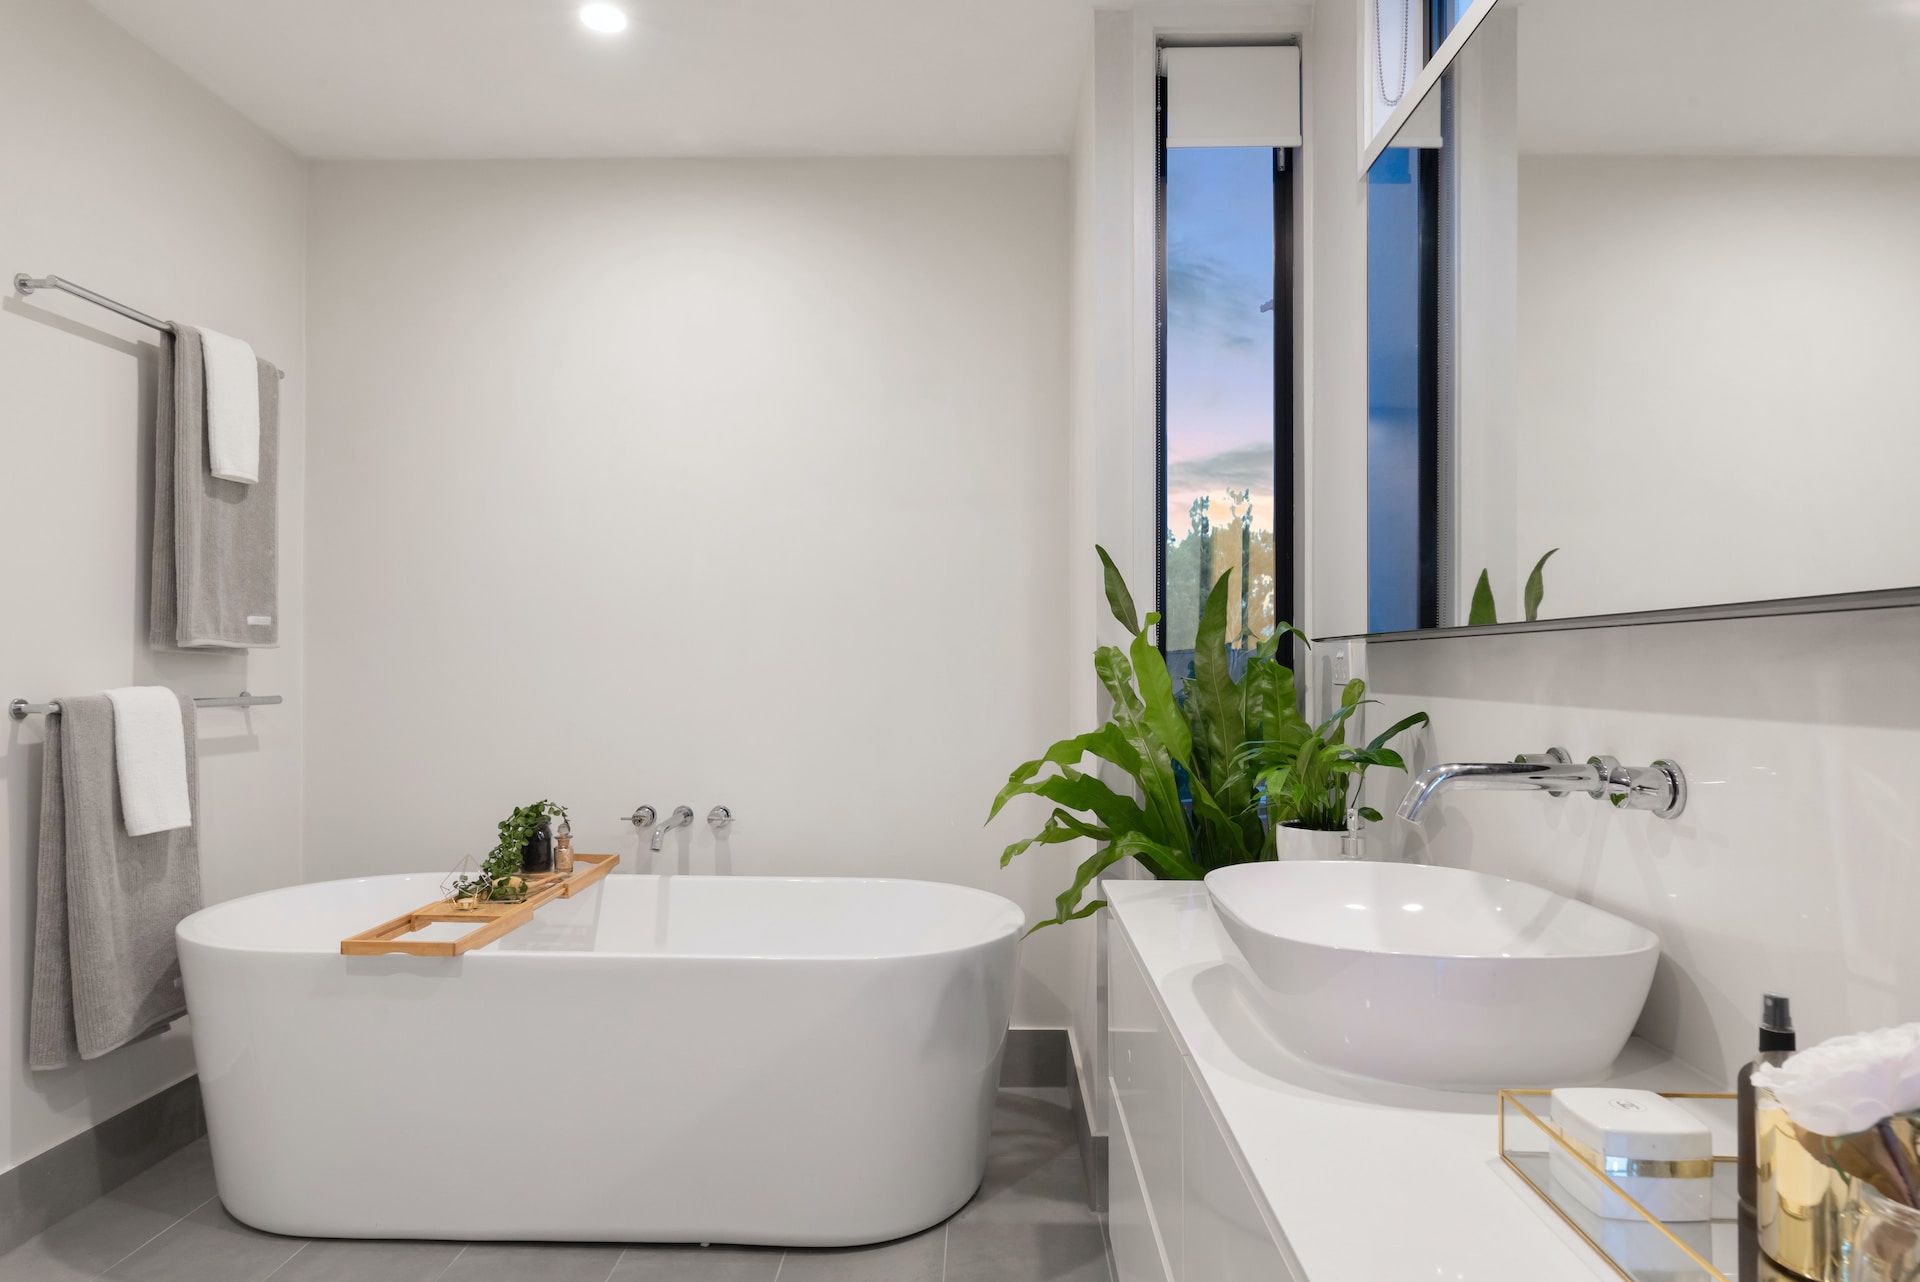 Master the Art of Bathroom Renovation With These 6 Insanely Effective Tips